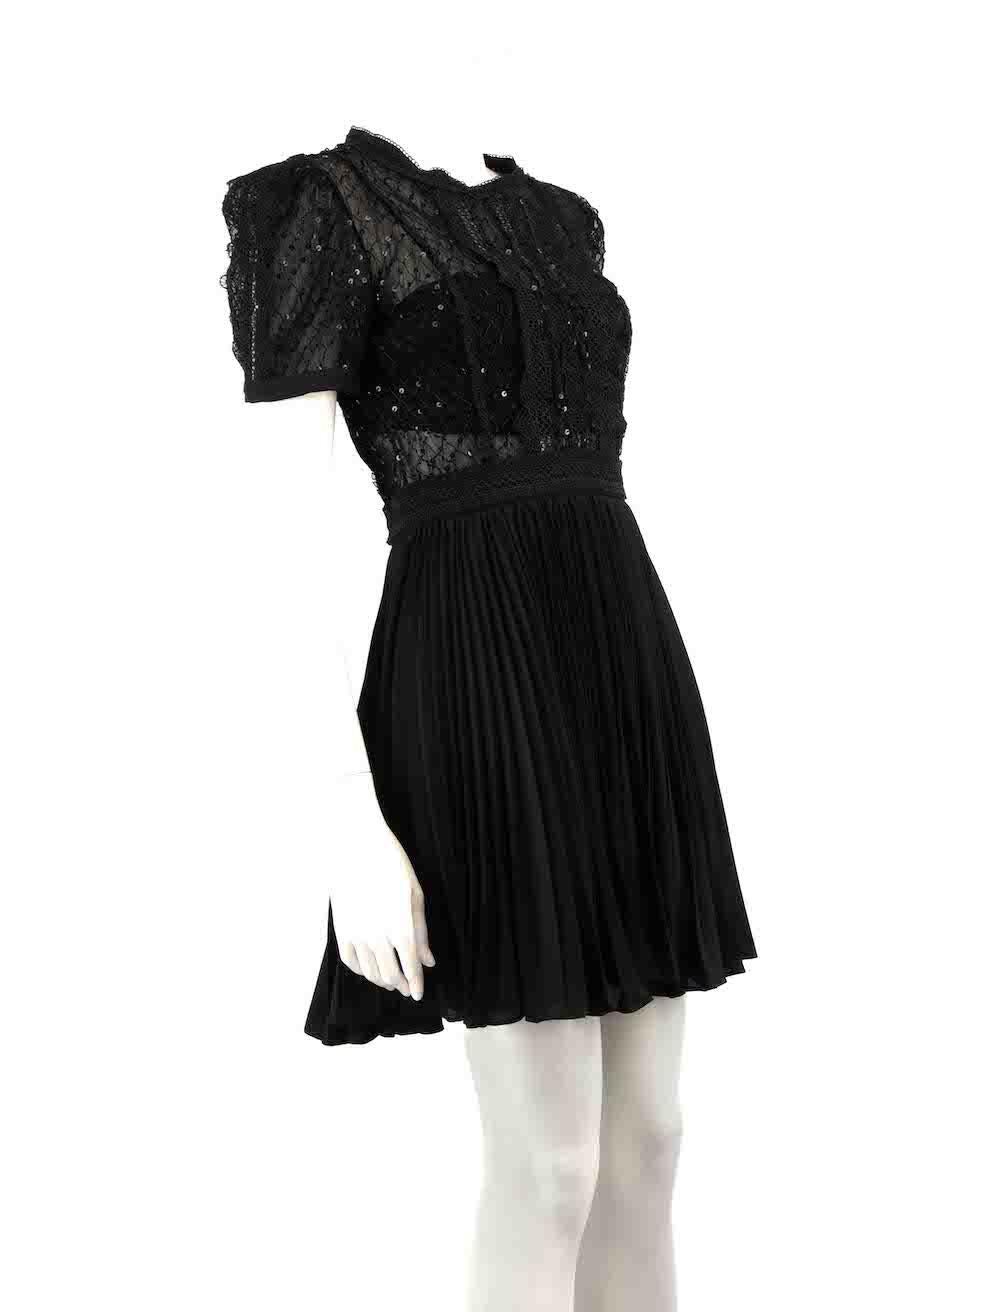 CONDITION is Very good. Hardly any visible wear to dress is evident on this used Self-Portrait designer resale item.
 
 
 
 Details
 
 
 Black
 
 Polyester
 
 Dres
 
 Sheer lace sequinned top
 
 Pleated skirt
 
 Knee length
 
 Round neck
 
 Short